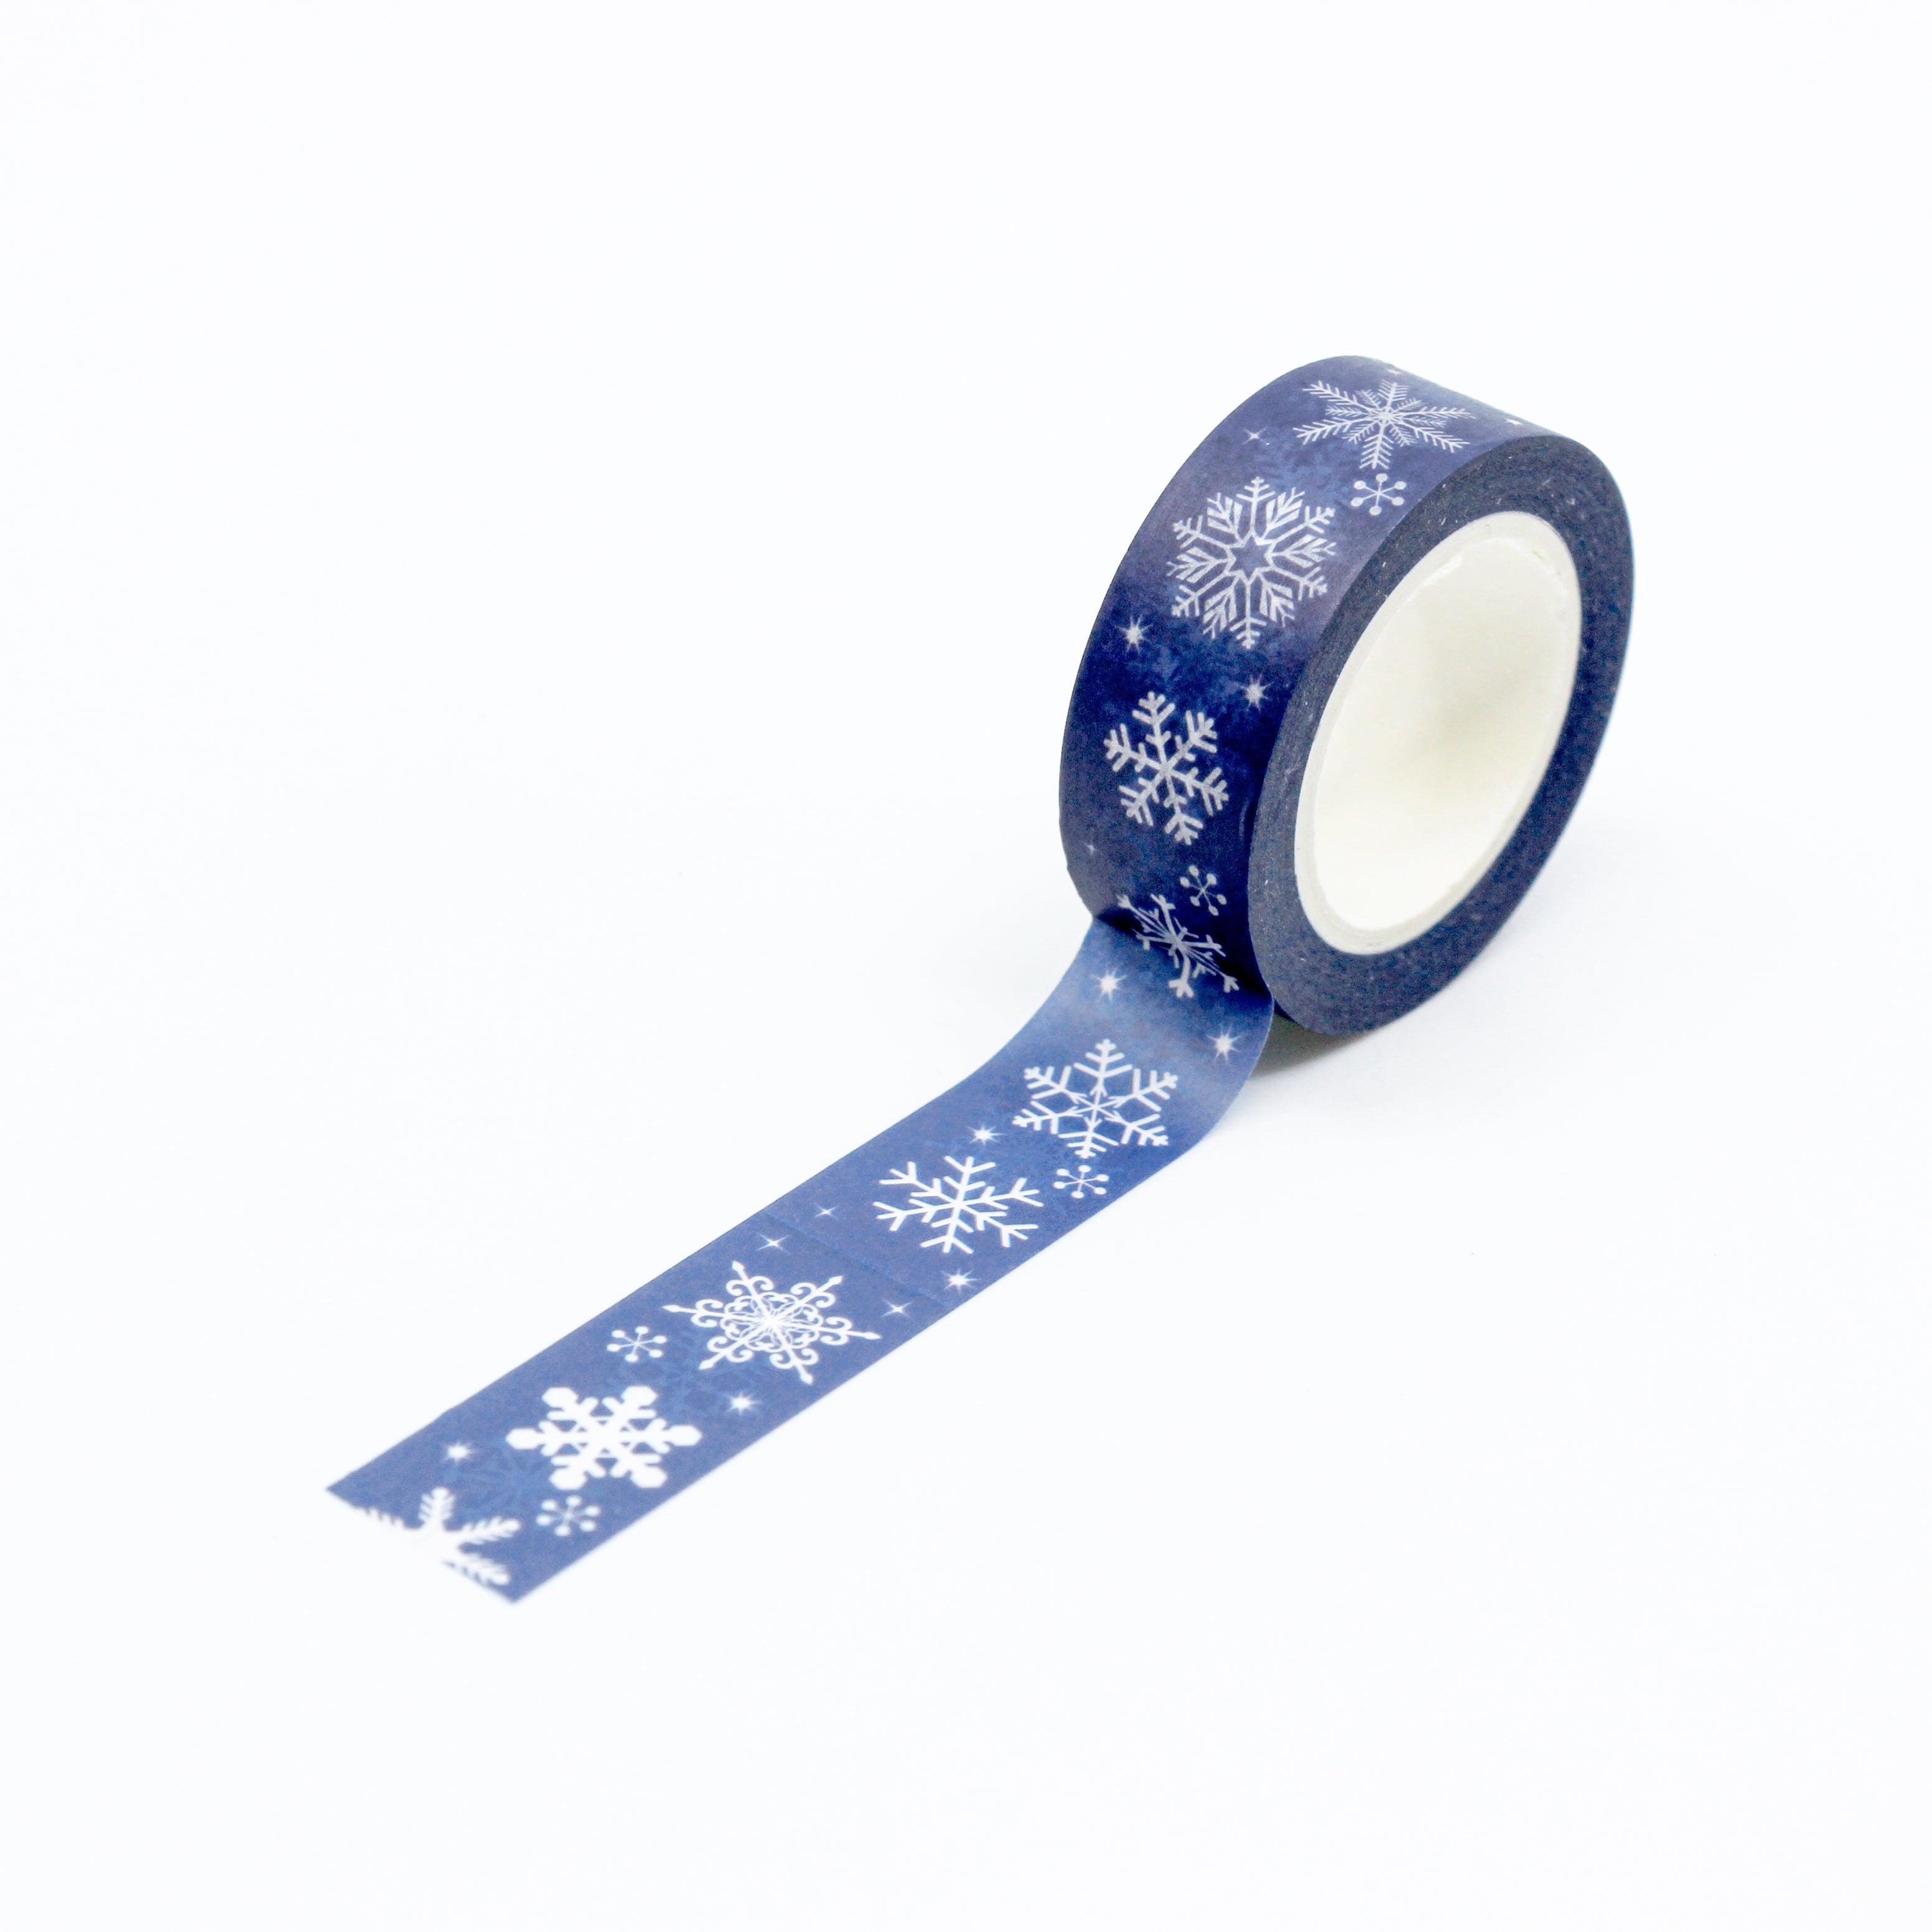 This is a full pattern repeat view of dark blue snowflakes washi tape from BBB Supplies Craft Shop